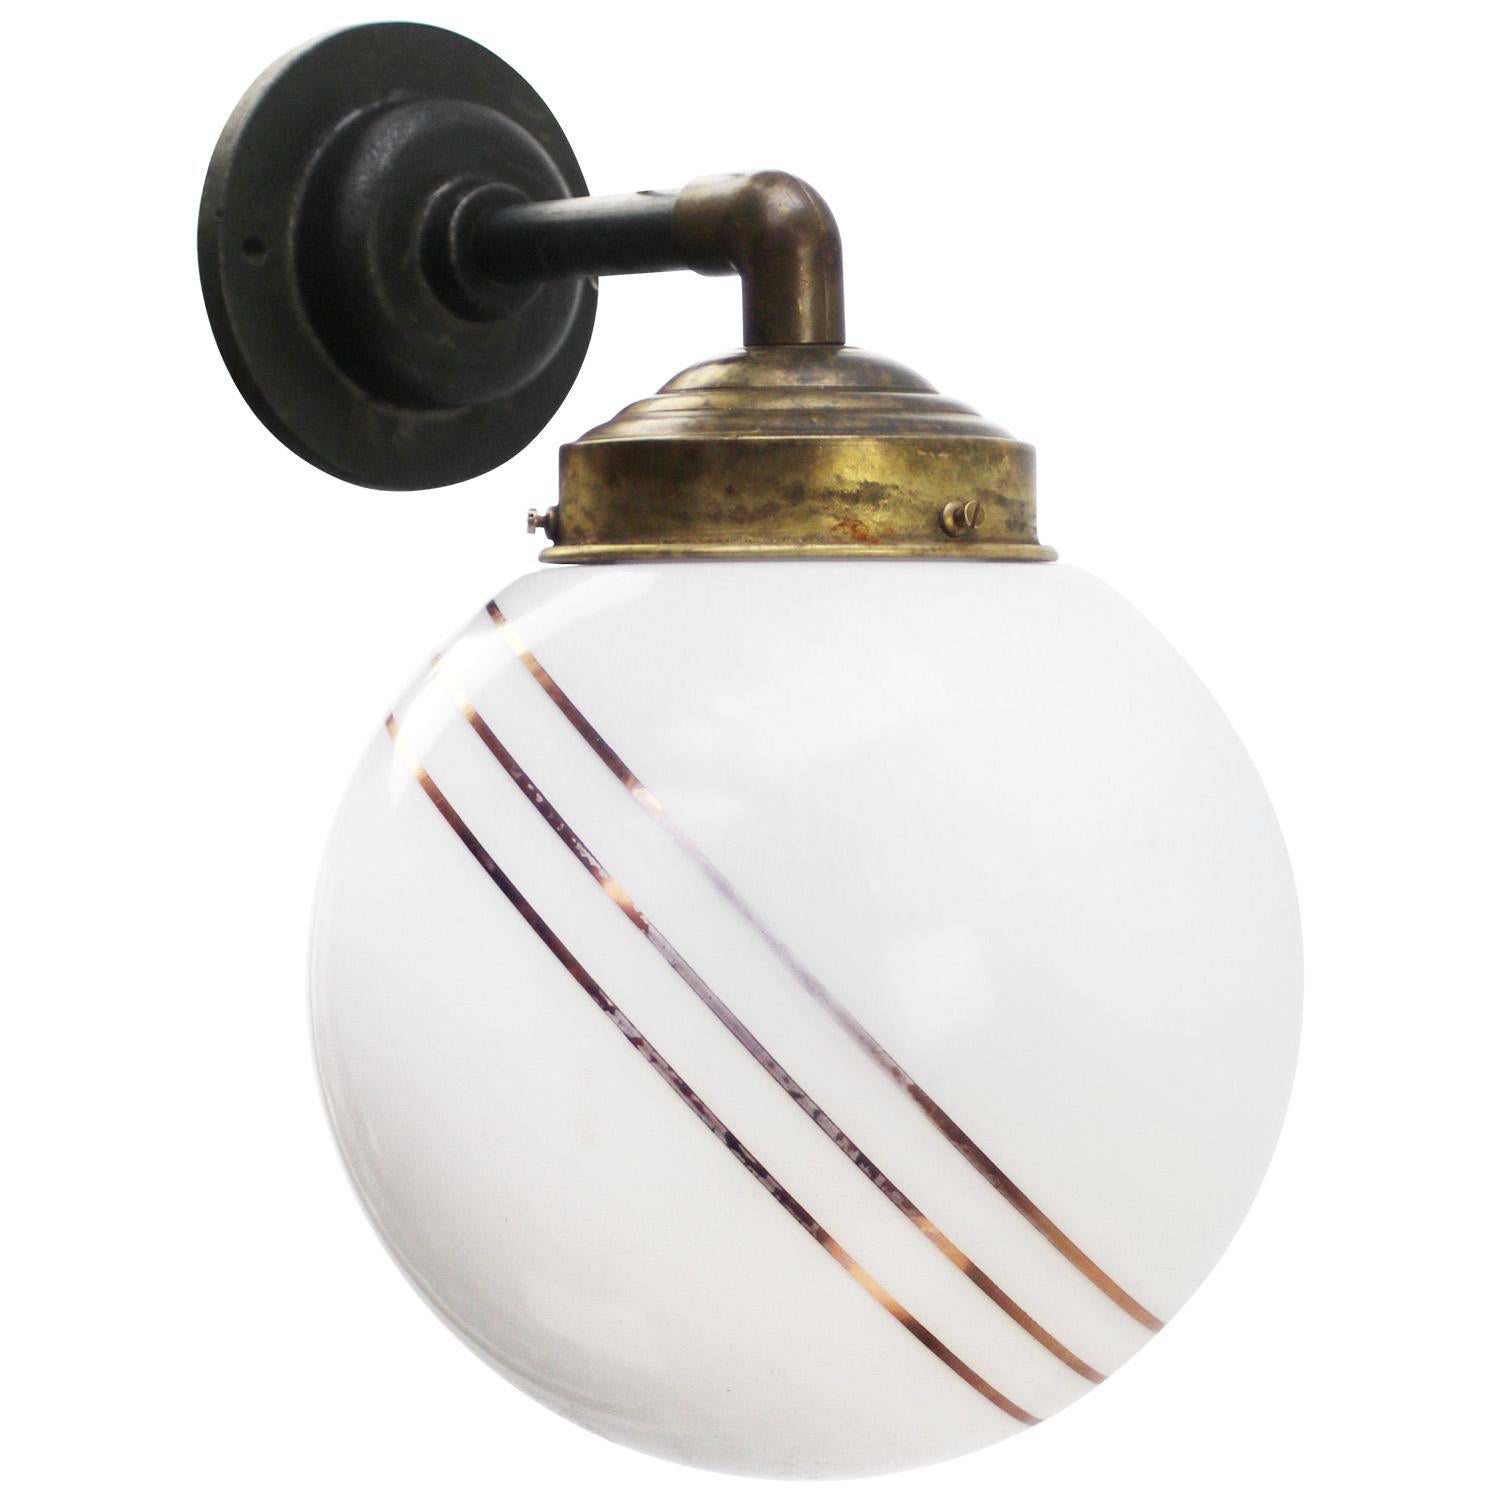 Brass and cast Iron Industrial wall light
White opaline glass globe with 3 golden stripes

Diameter cast iron wall piece: 10.5 cm / 4”, 2 holes to secure

Weight: 2.50 kg / 5.5 lb

Priced per individual item. All lamps have been made suitable by